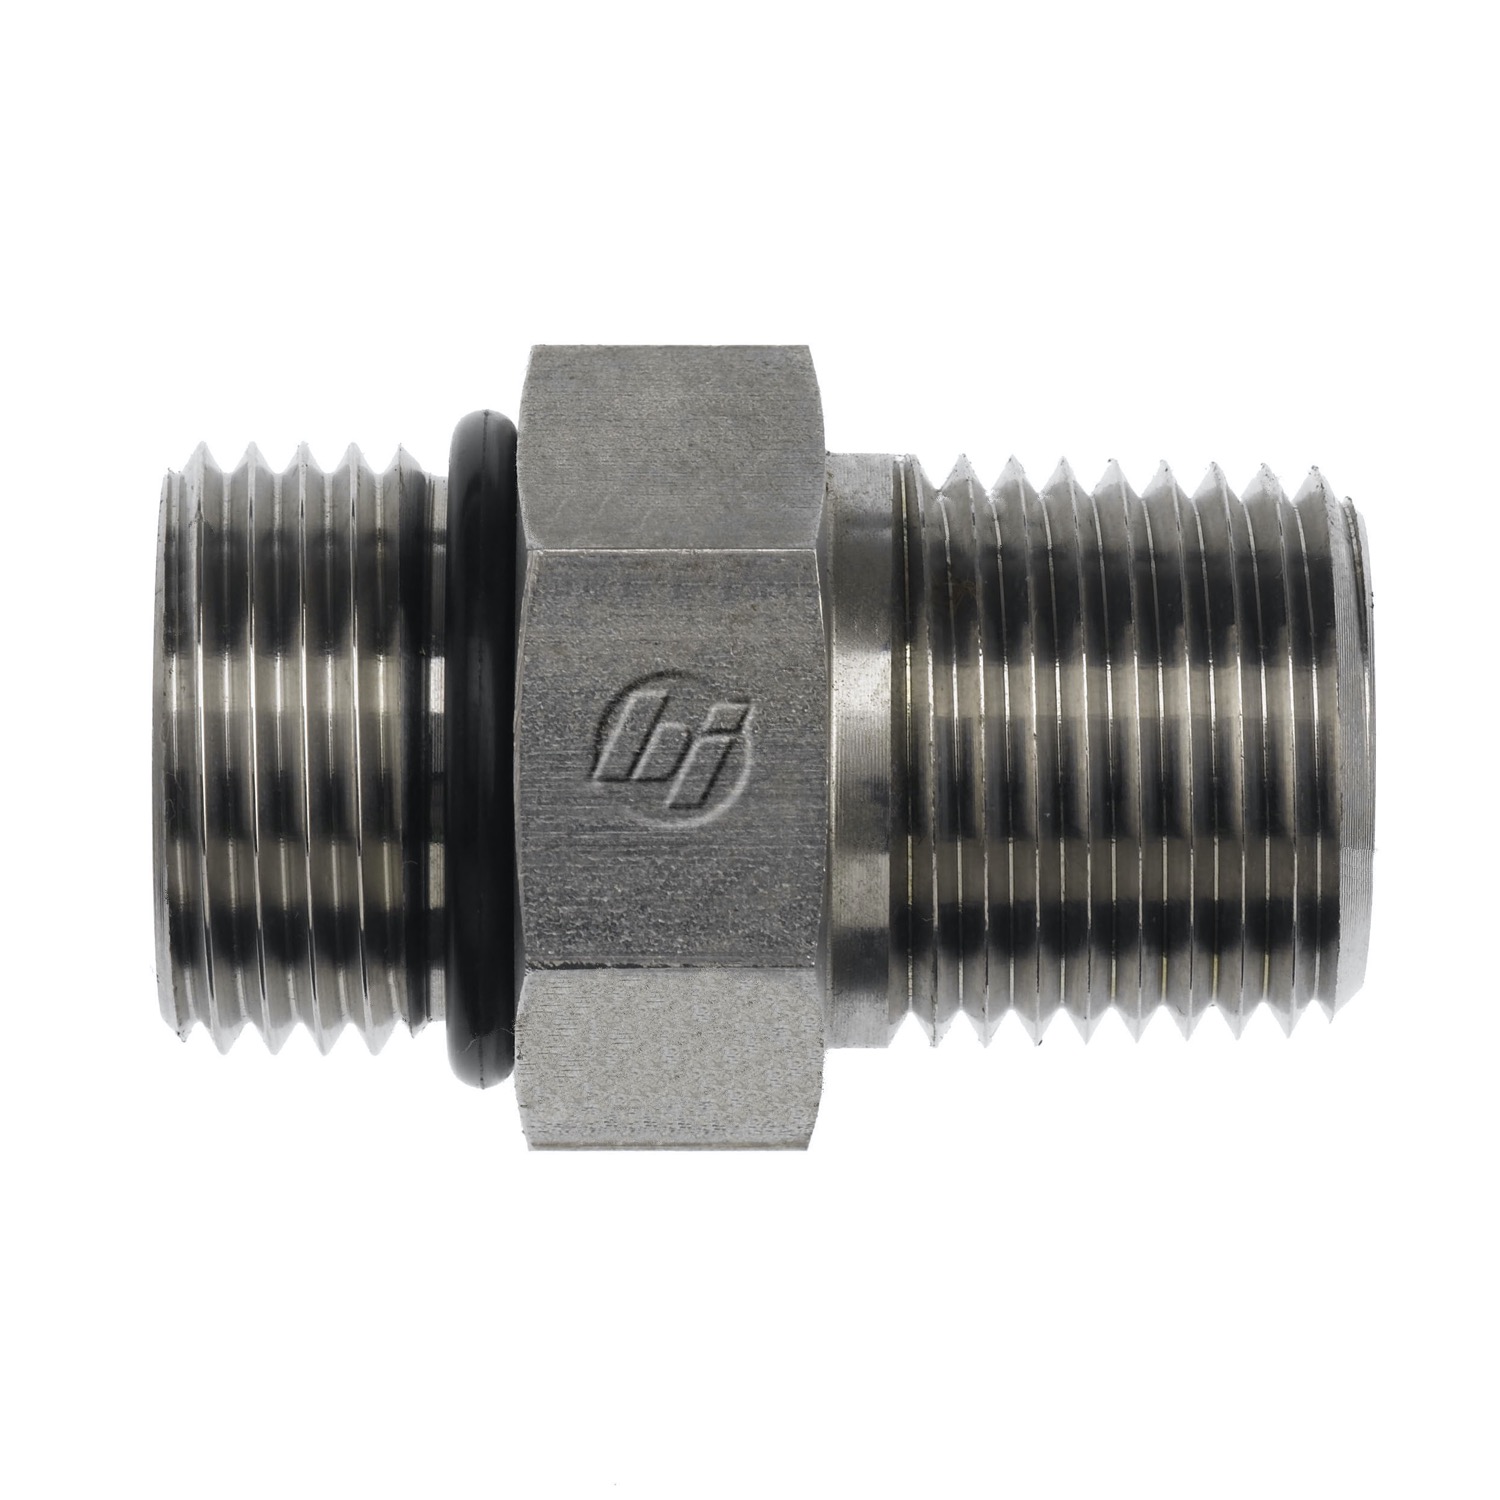 Hydraulic Hose Adapters - Straight Fitting, O-Ring Boss to NPTF, 6401 Series